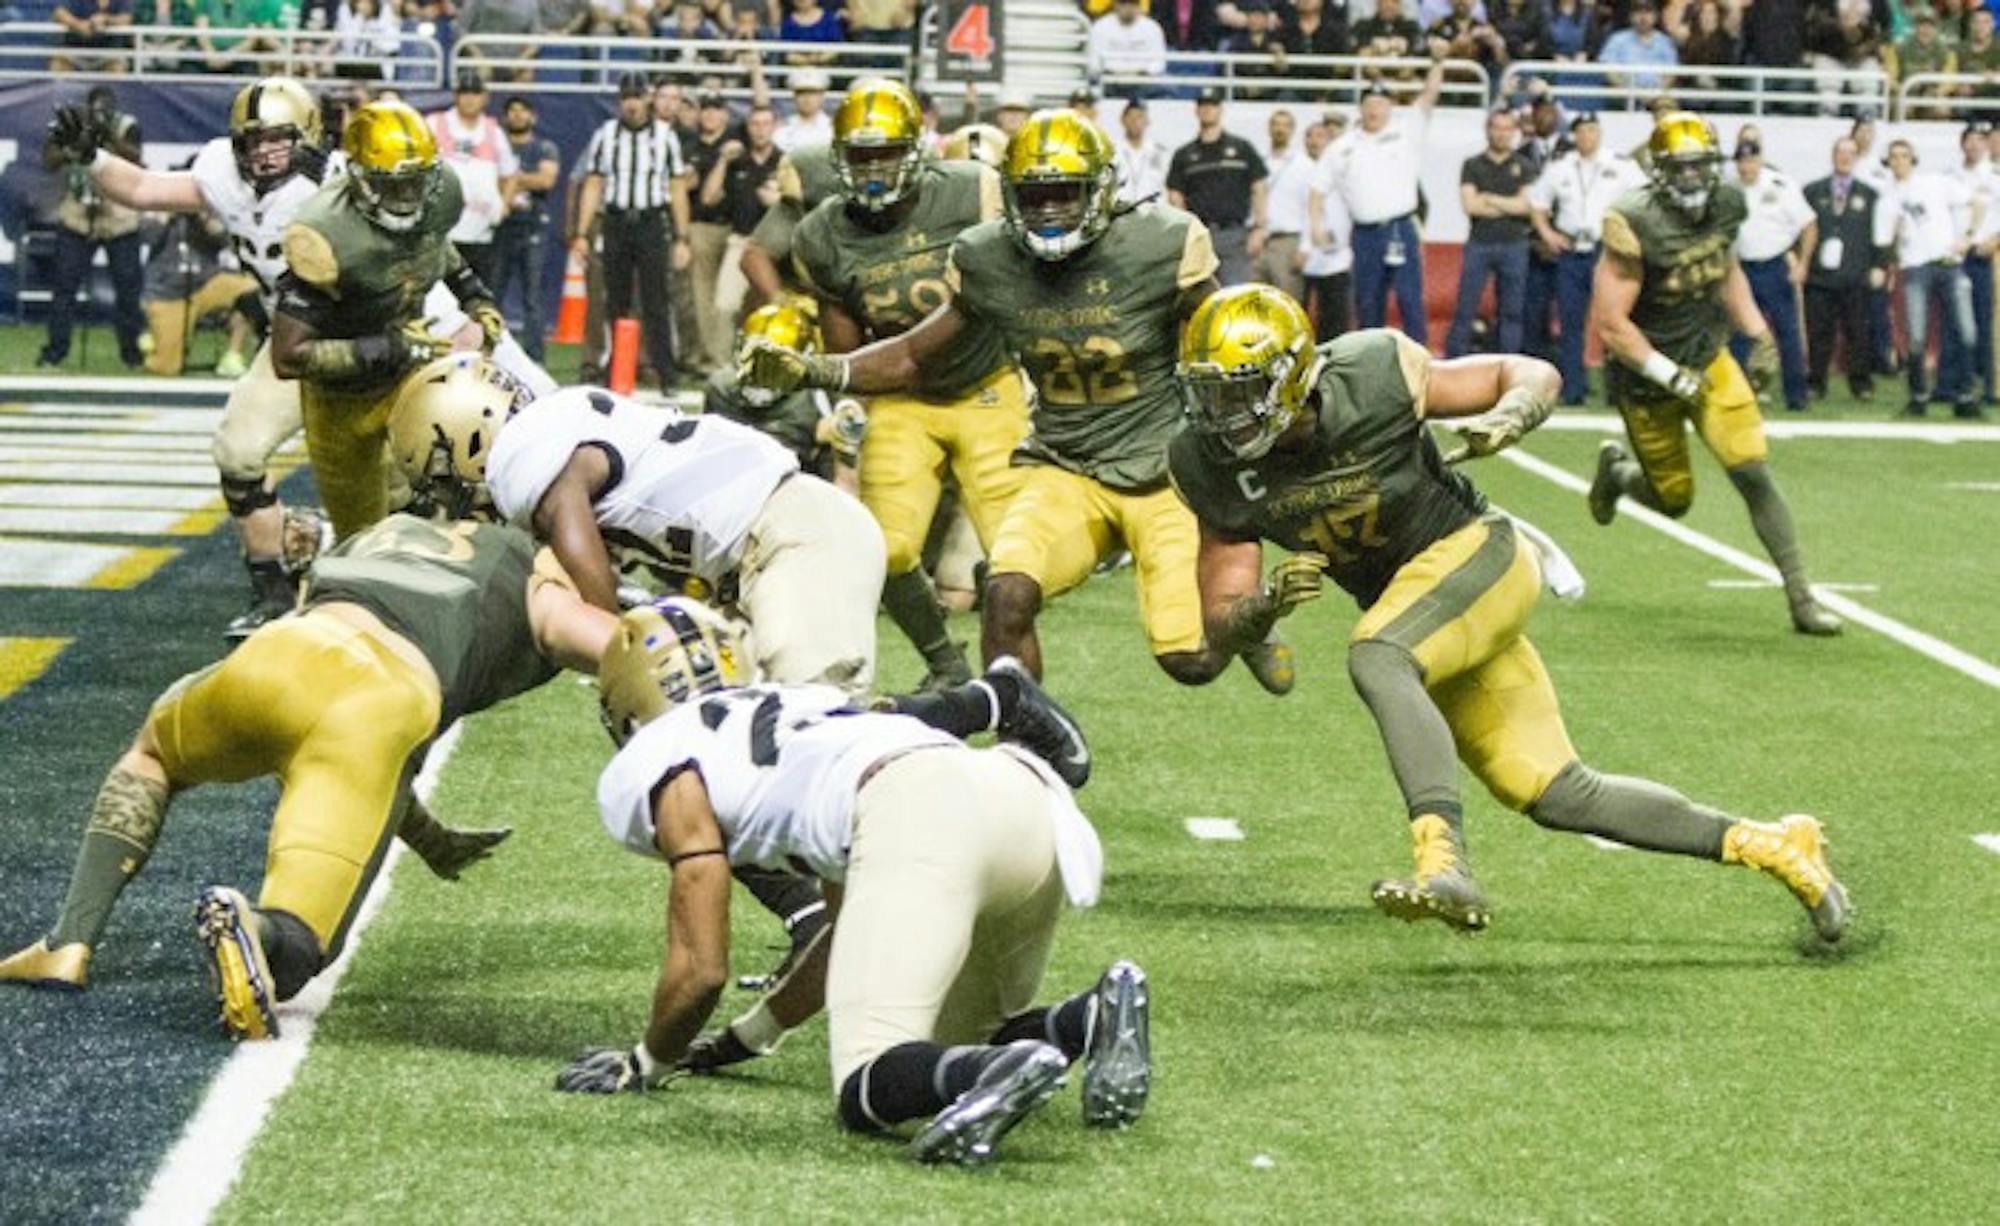 Irish senior linebacker James Onwualu pursues an Army ball carrier near the goal line during Notre Dame’s 44-6 victory over the Black Knights at the Alamodome in San Antonio on Nov. 12. Onwualu started his career at Notre Dame as a receiver, but switched to linebacker during his sophomore season and is now one of Notre Dame’s four senior captains.